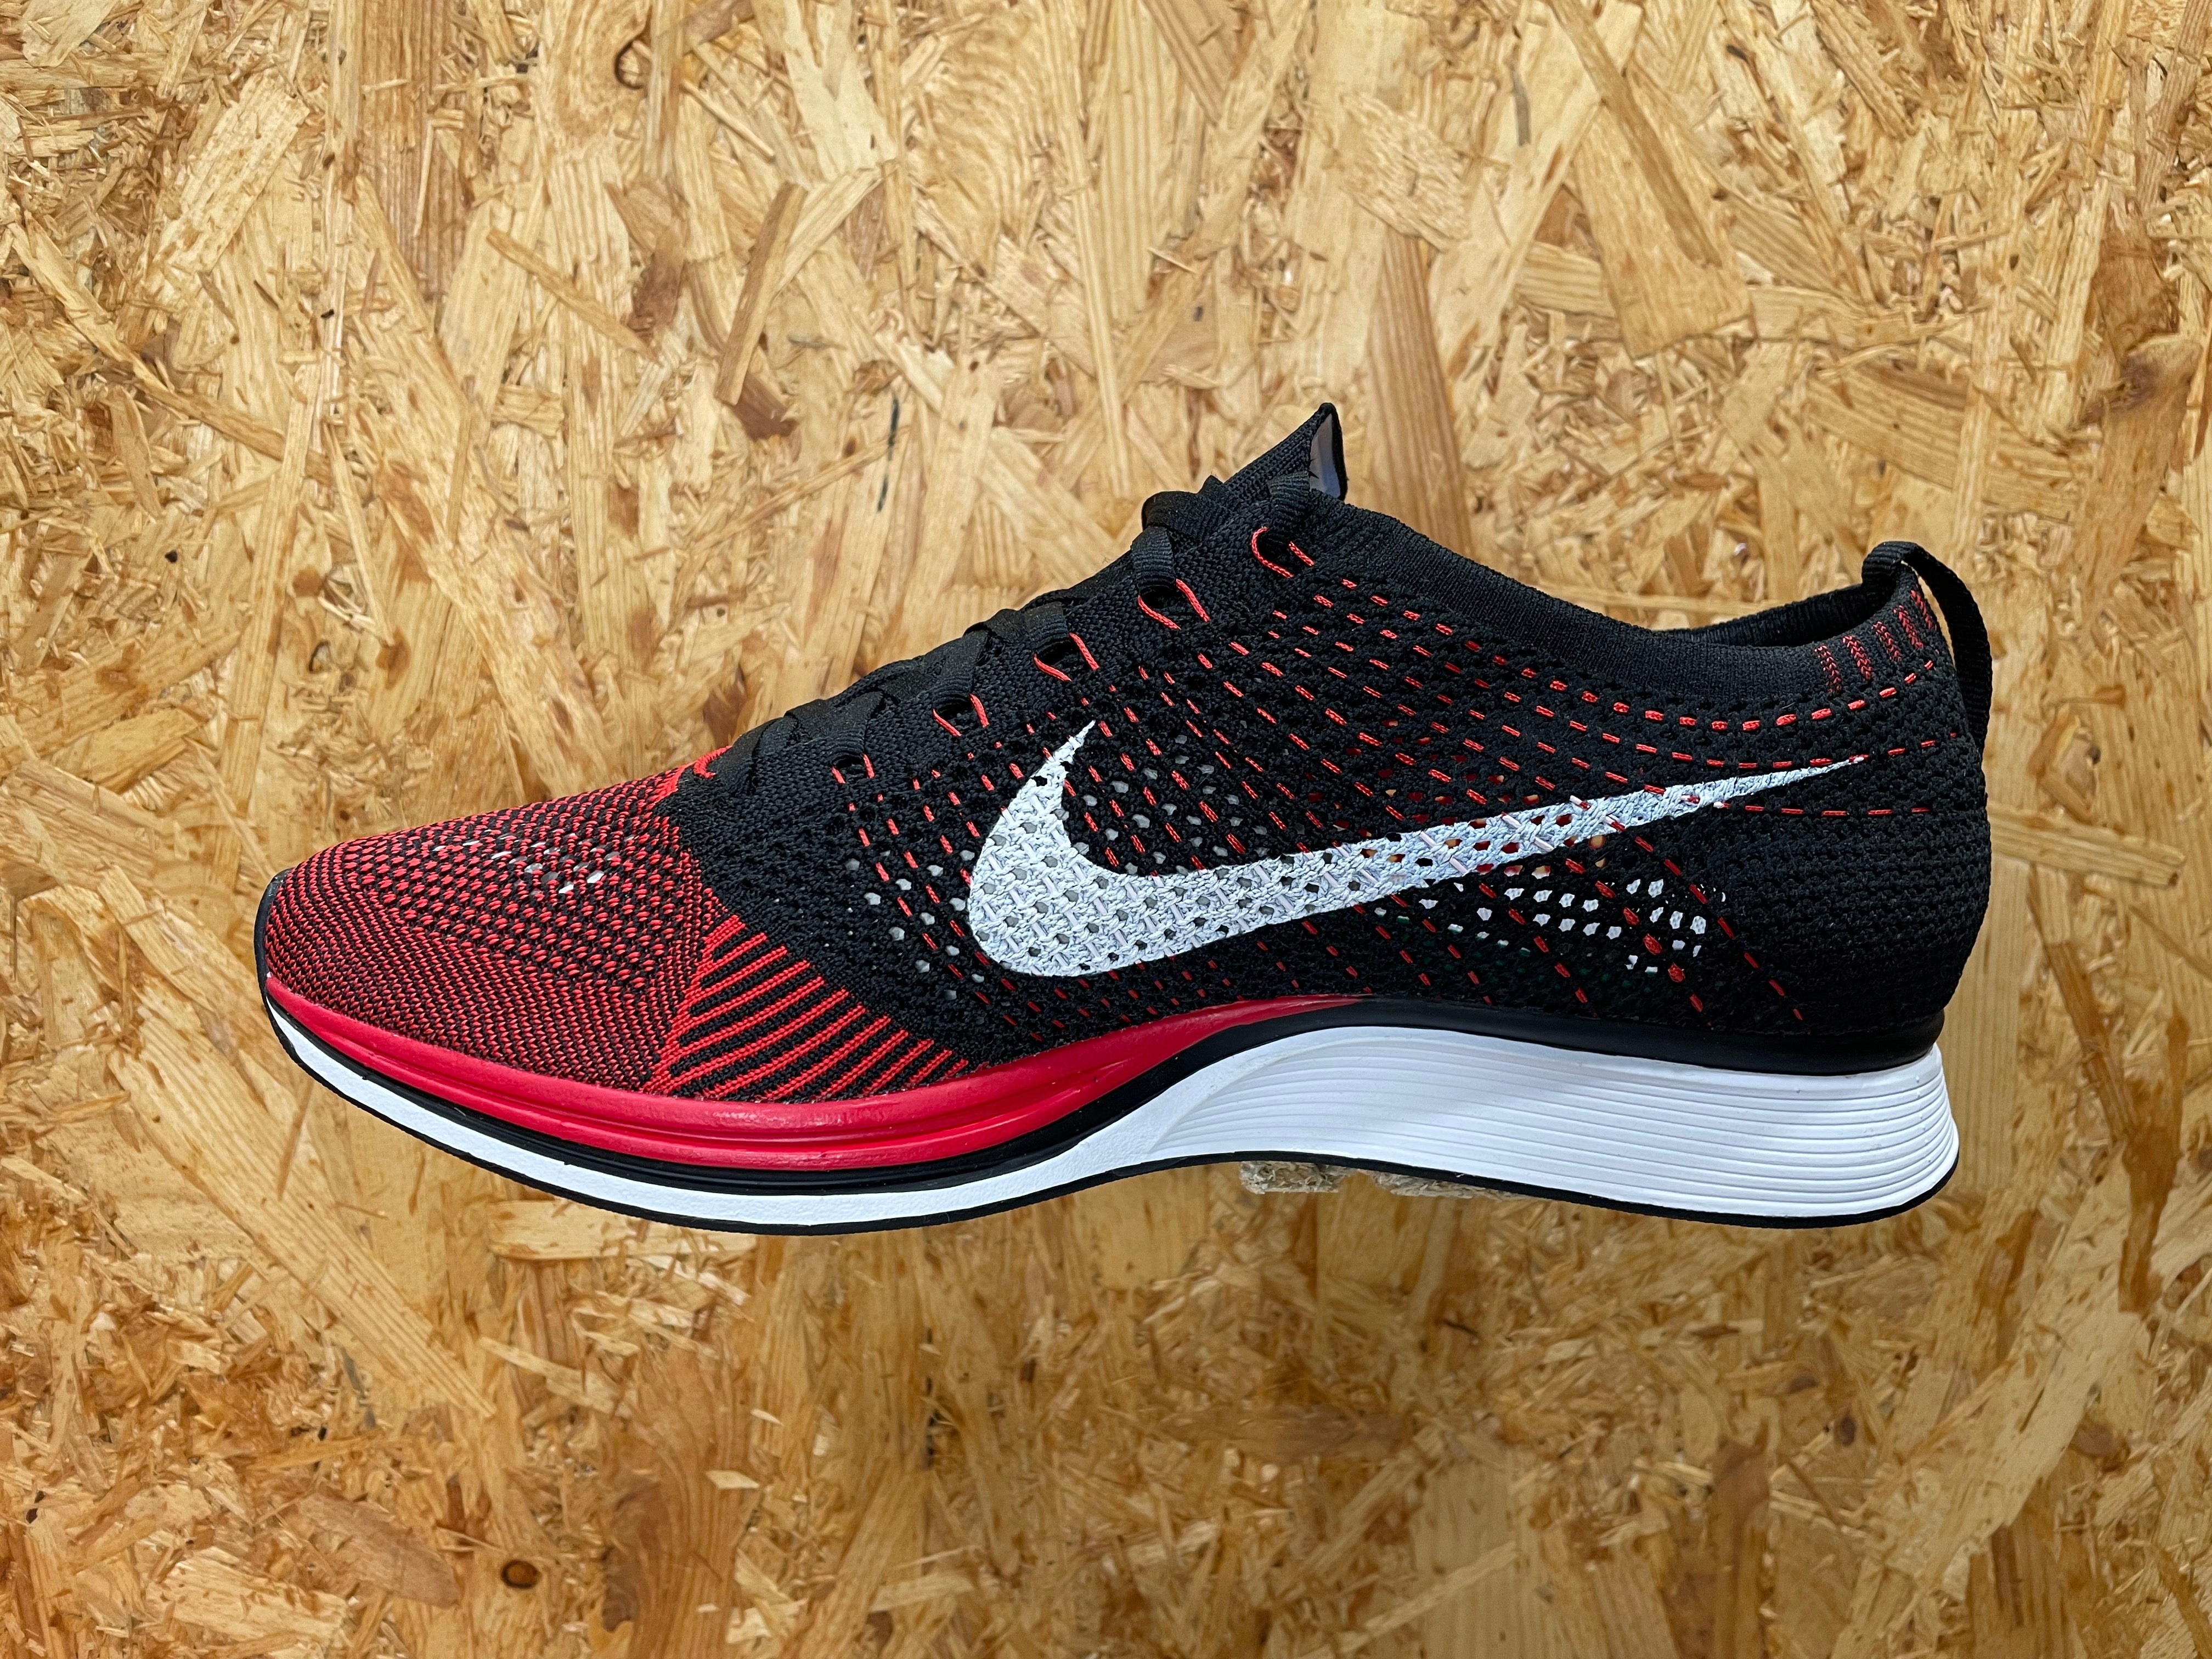 red flyknits